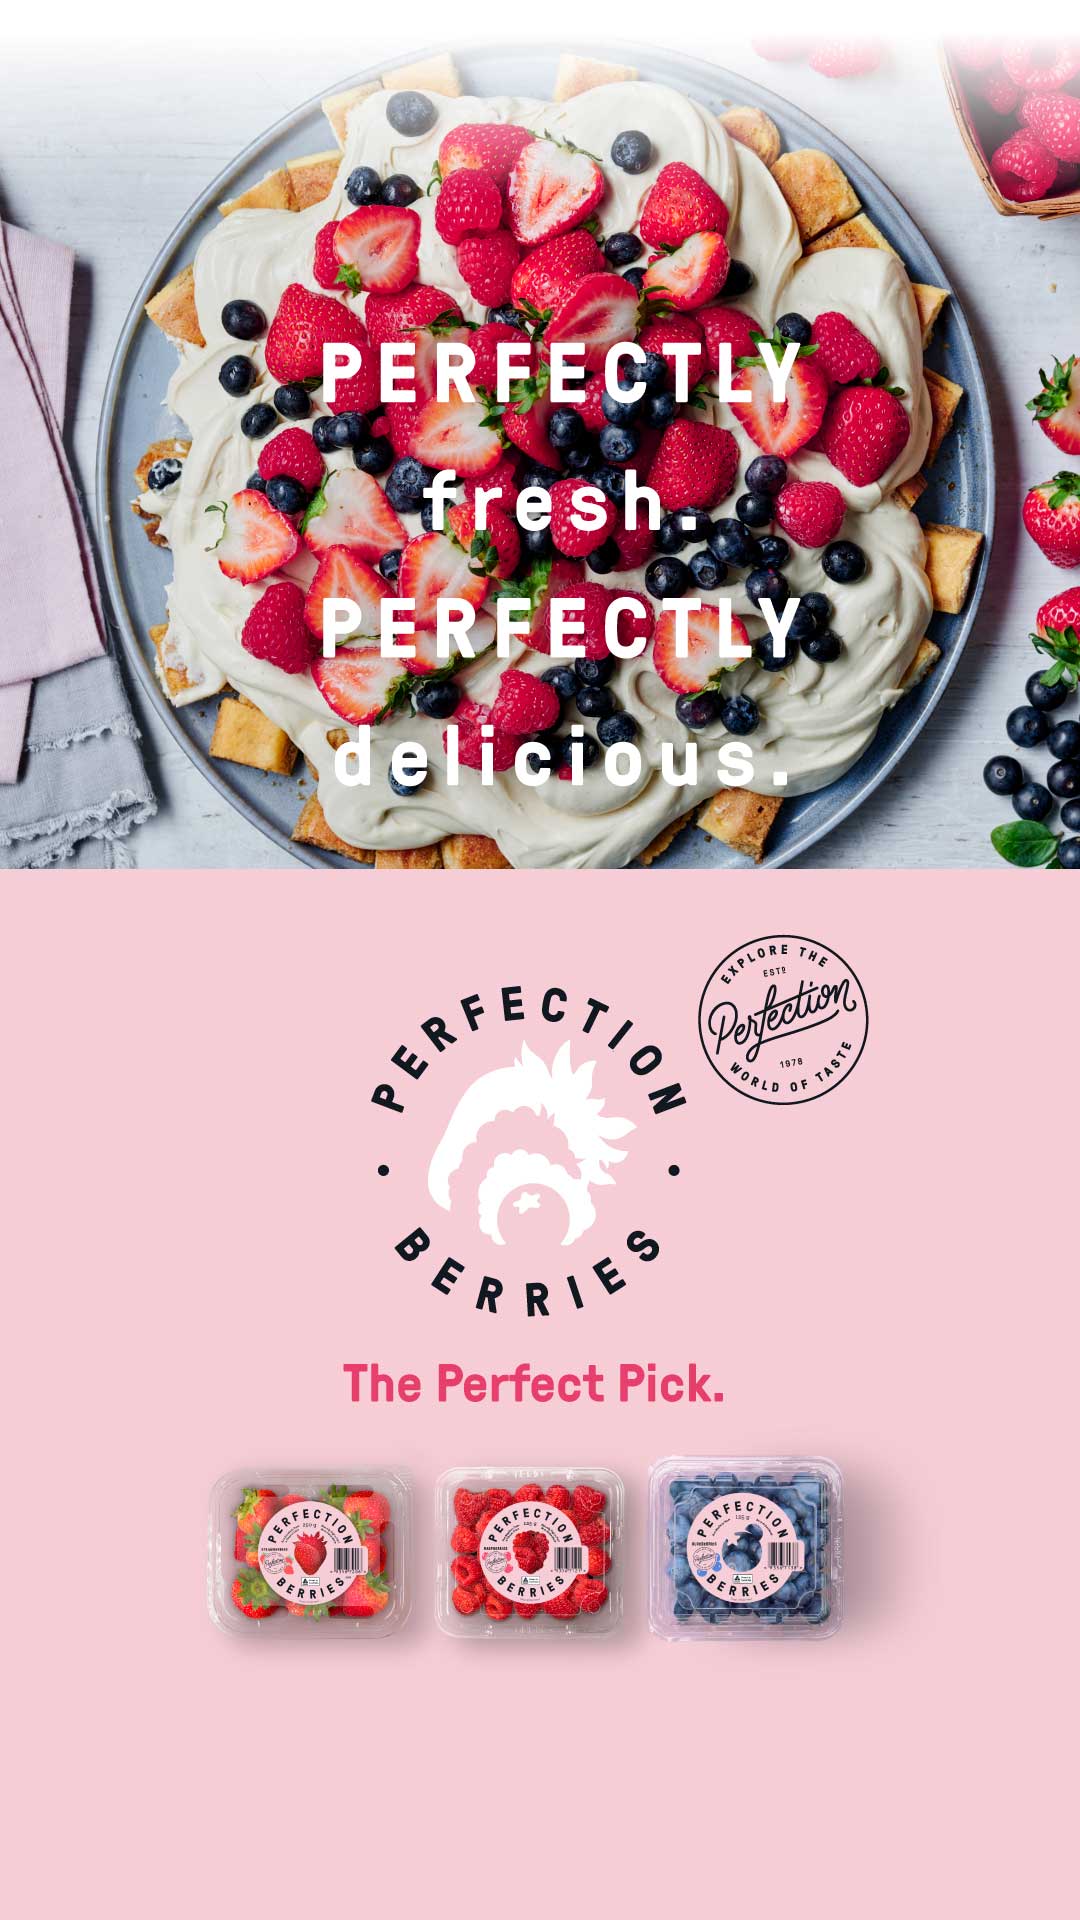 mobile-perfection-berries2